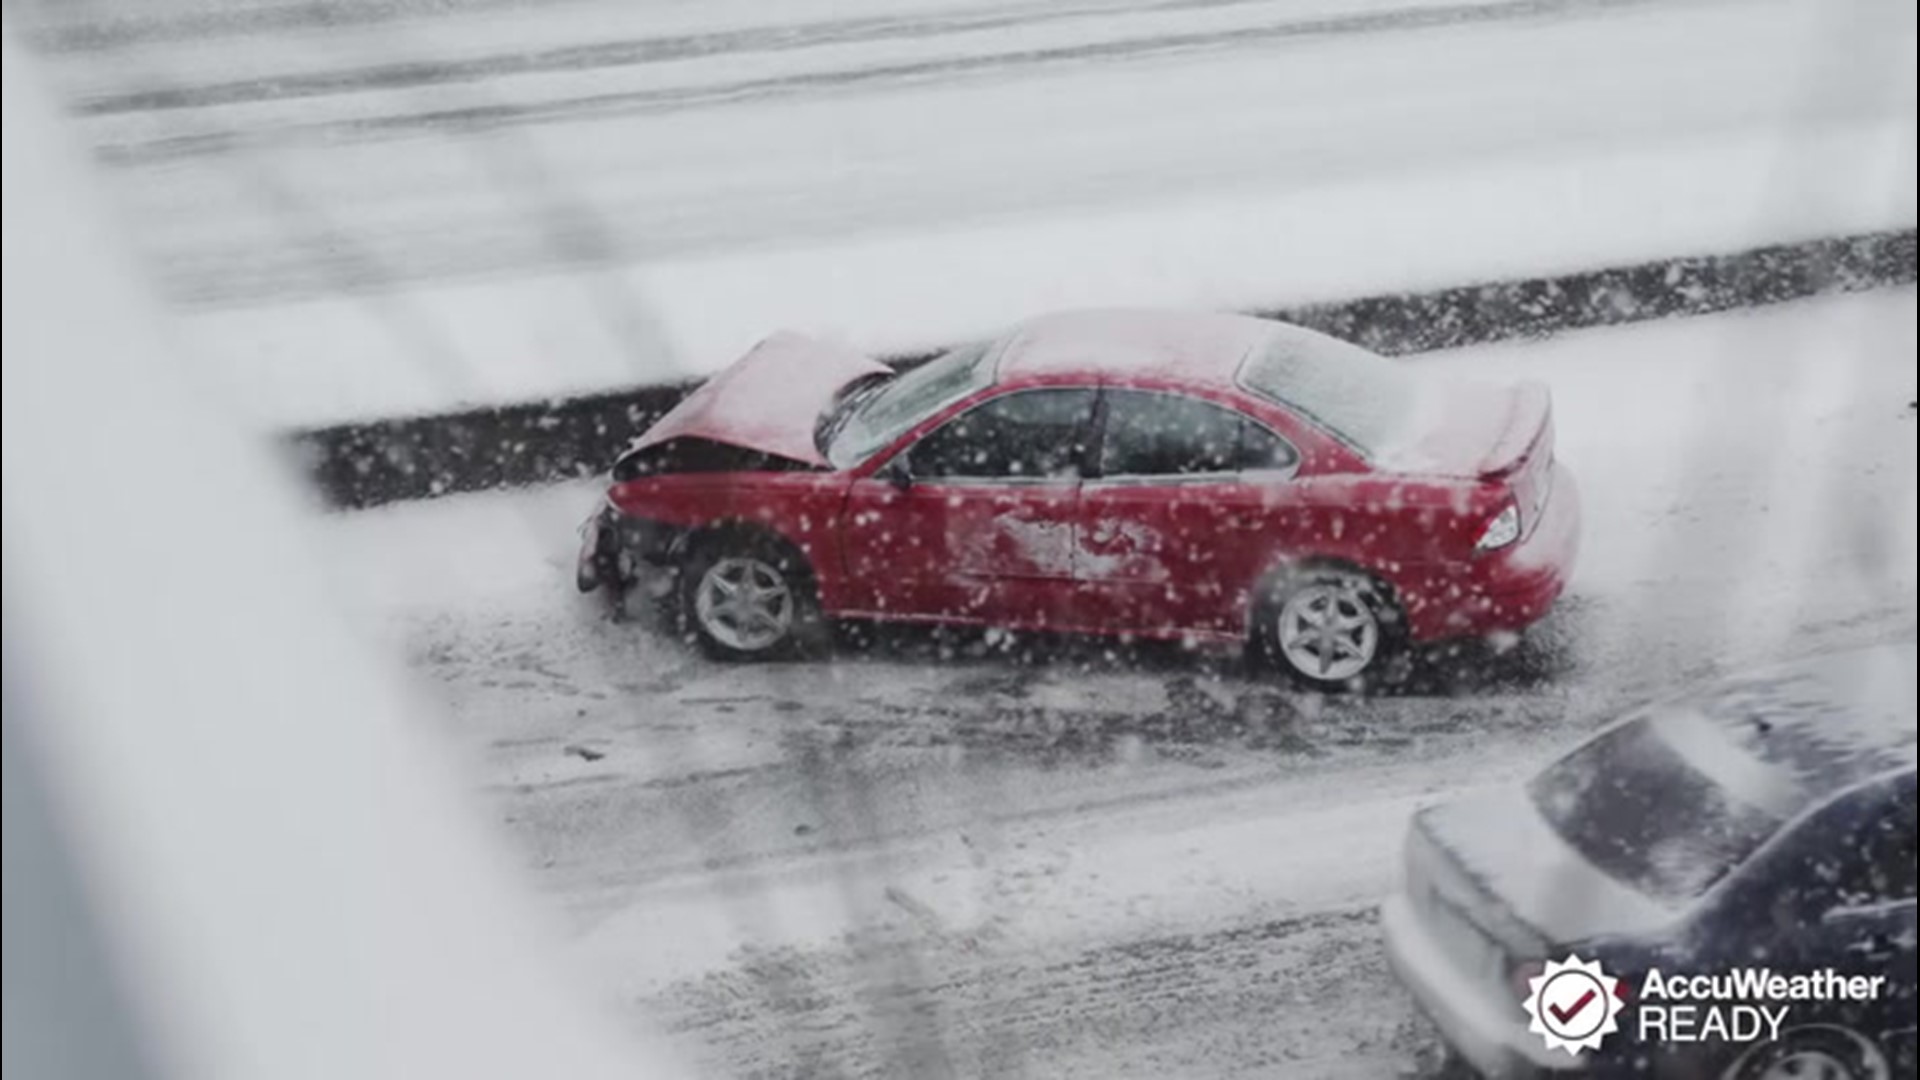 During the winter, driving under treacherous conditions requires your full attention. Here are the most common causes of accidents and how you can stay safe.